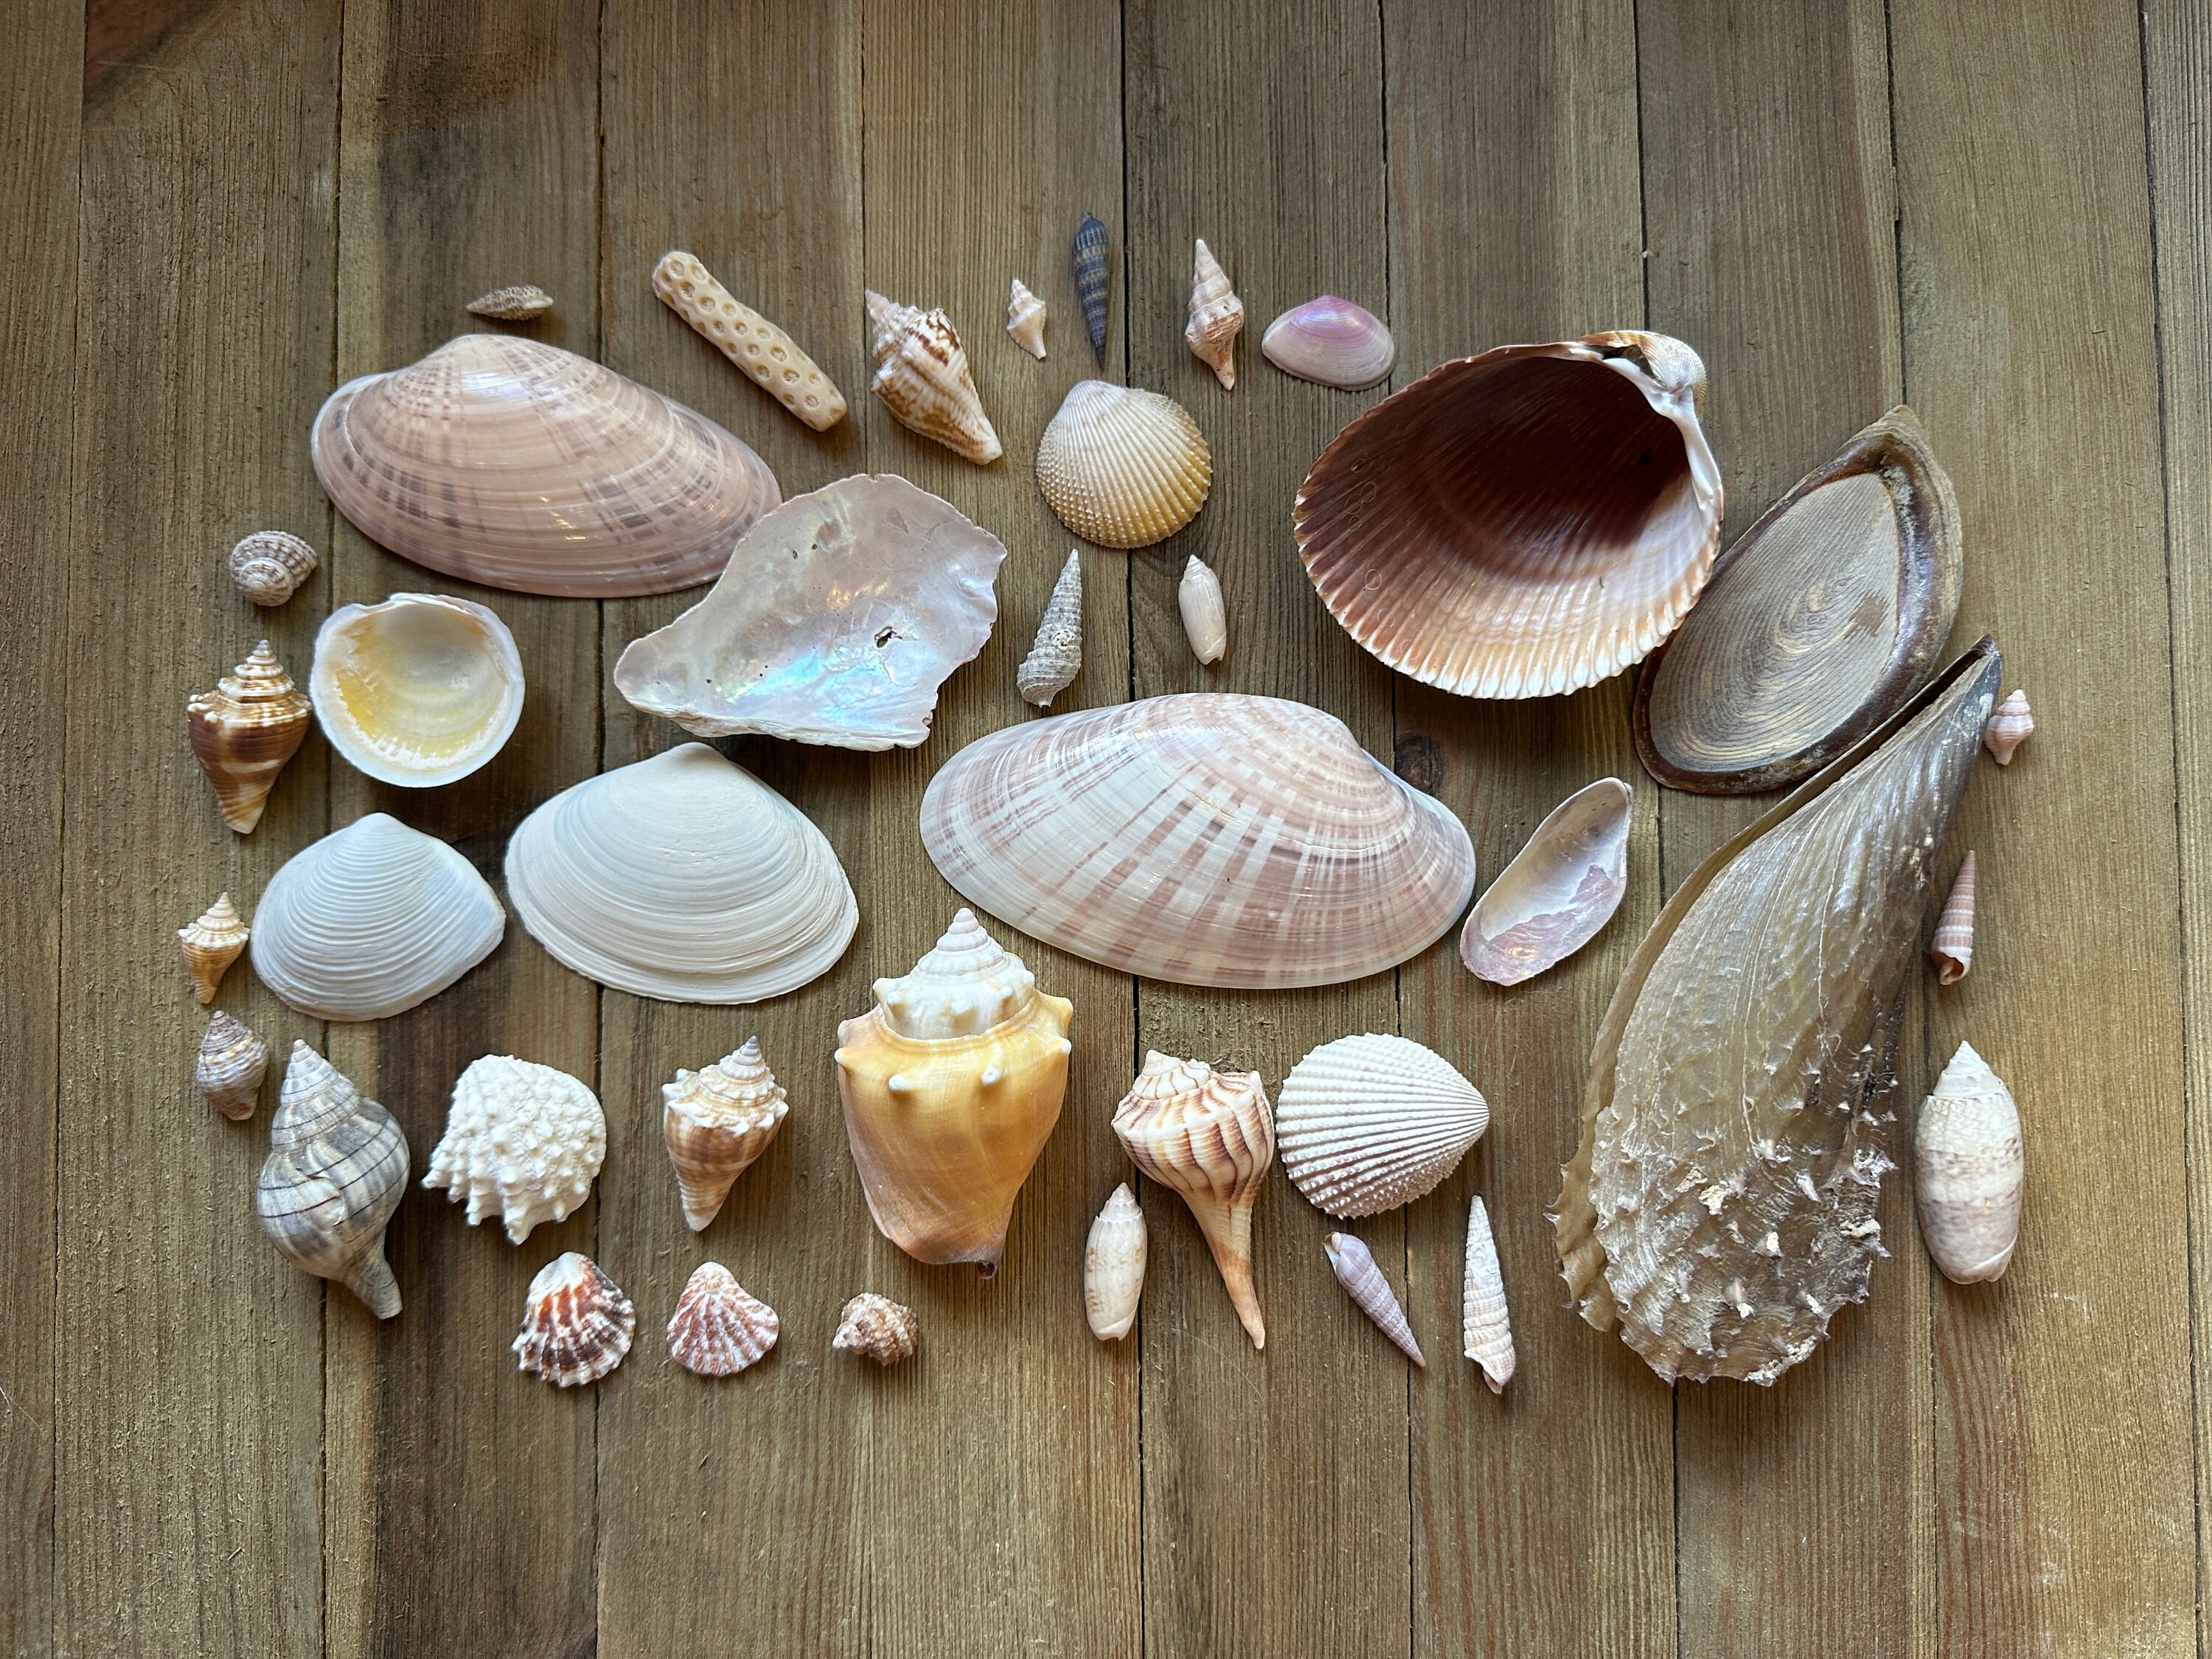 Speckled White Clam Shells - Clycymeris Pectunculus (approx. 1